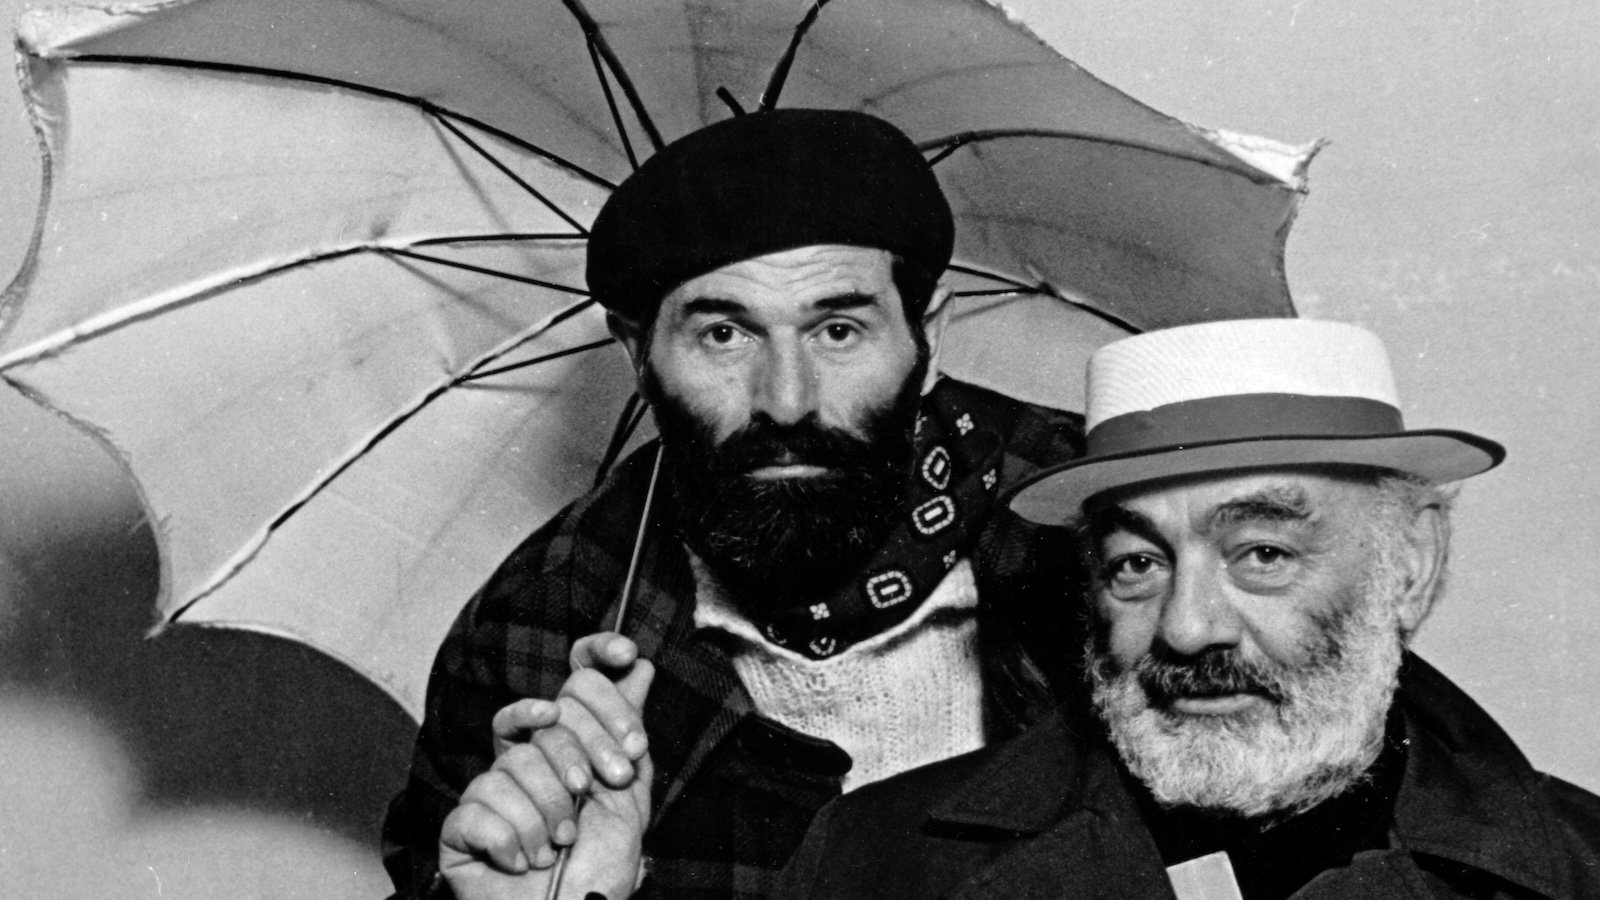 Two bearded, hatted men, one with a gray beard the other with a brown beard stand together looking at us; the younger one in the back holds an open umbrella.